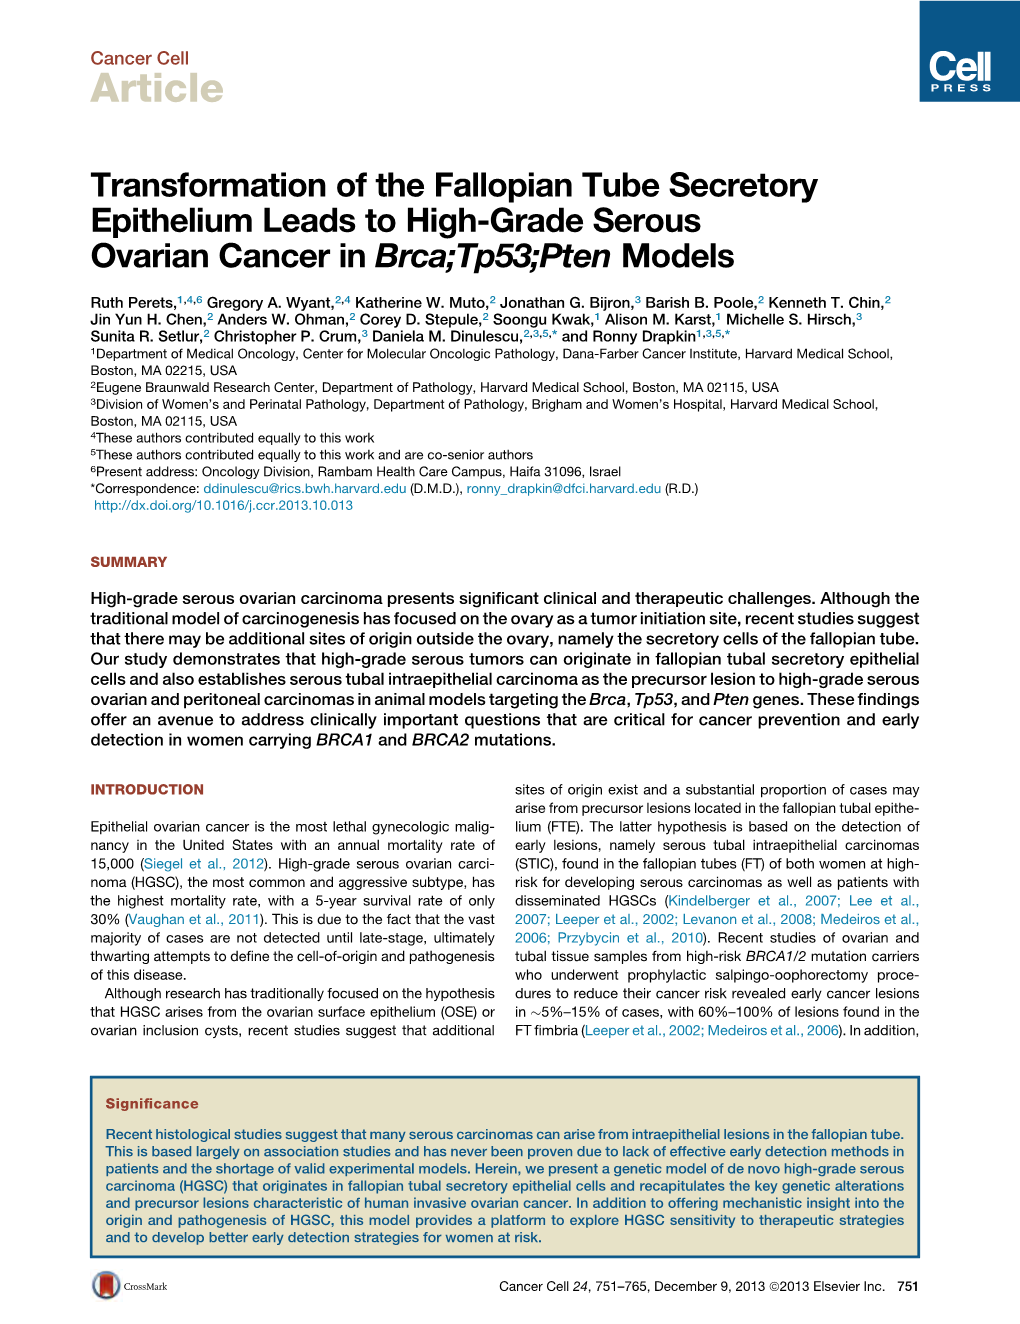 Transformation of the Fallopian Tube Secretory Epithelium Leads to High-Grade Serous Ovarian Cancer in Brca;Tp53;Pten Models